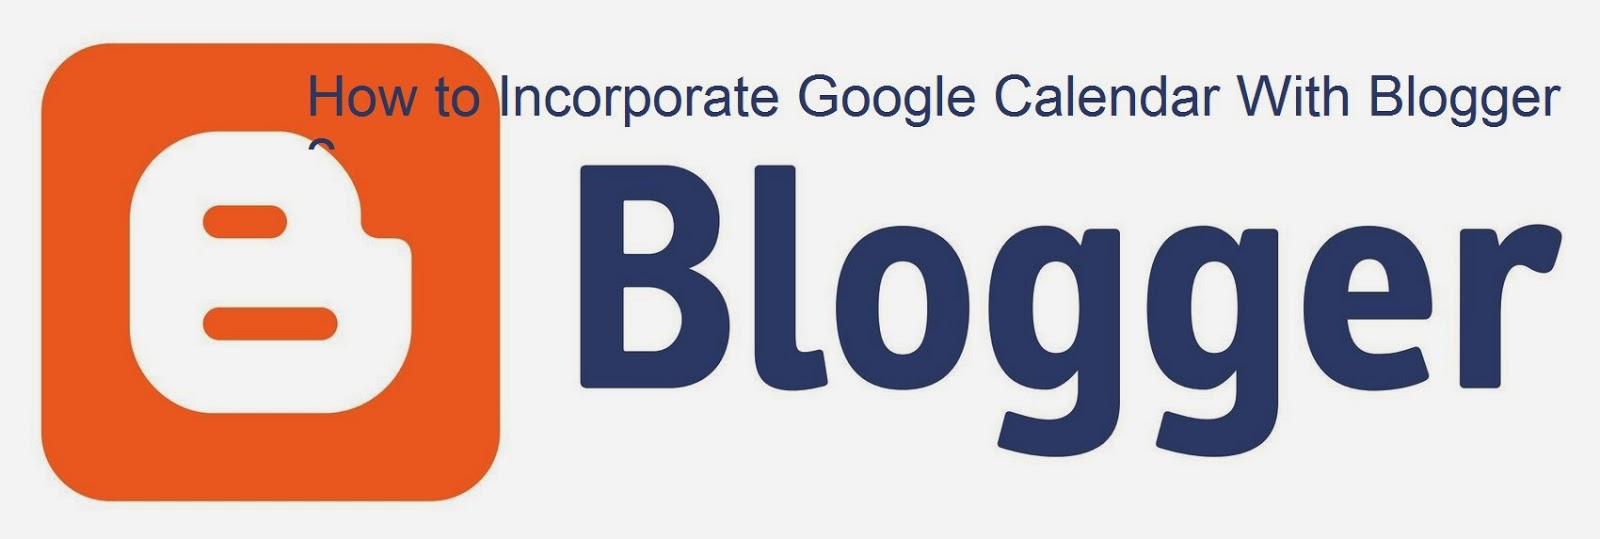 How to Incorporate Google Calendar With Blogger : eAskme